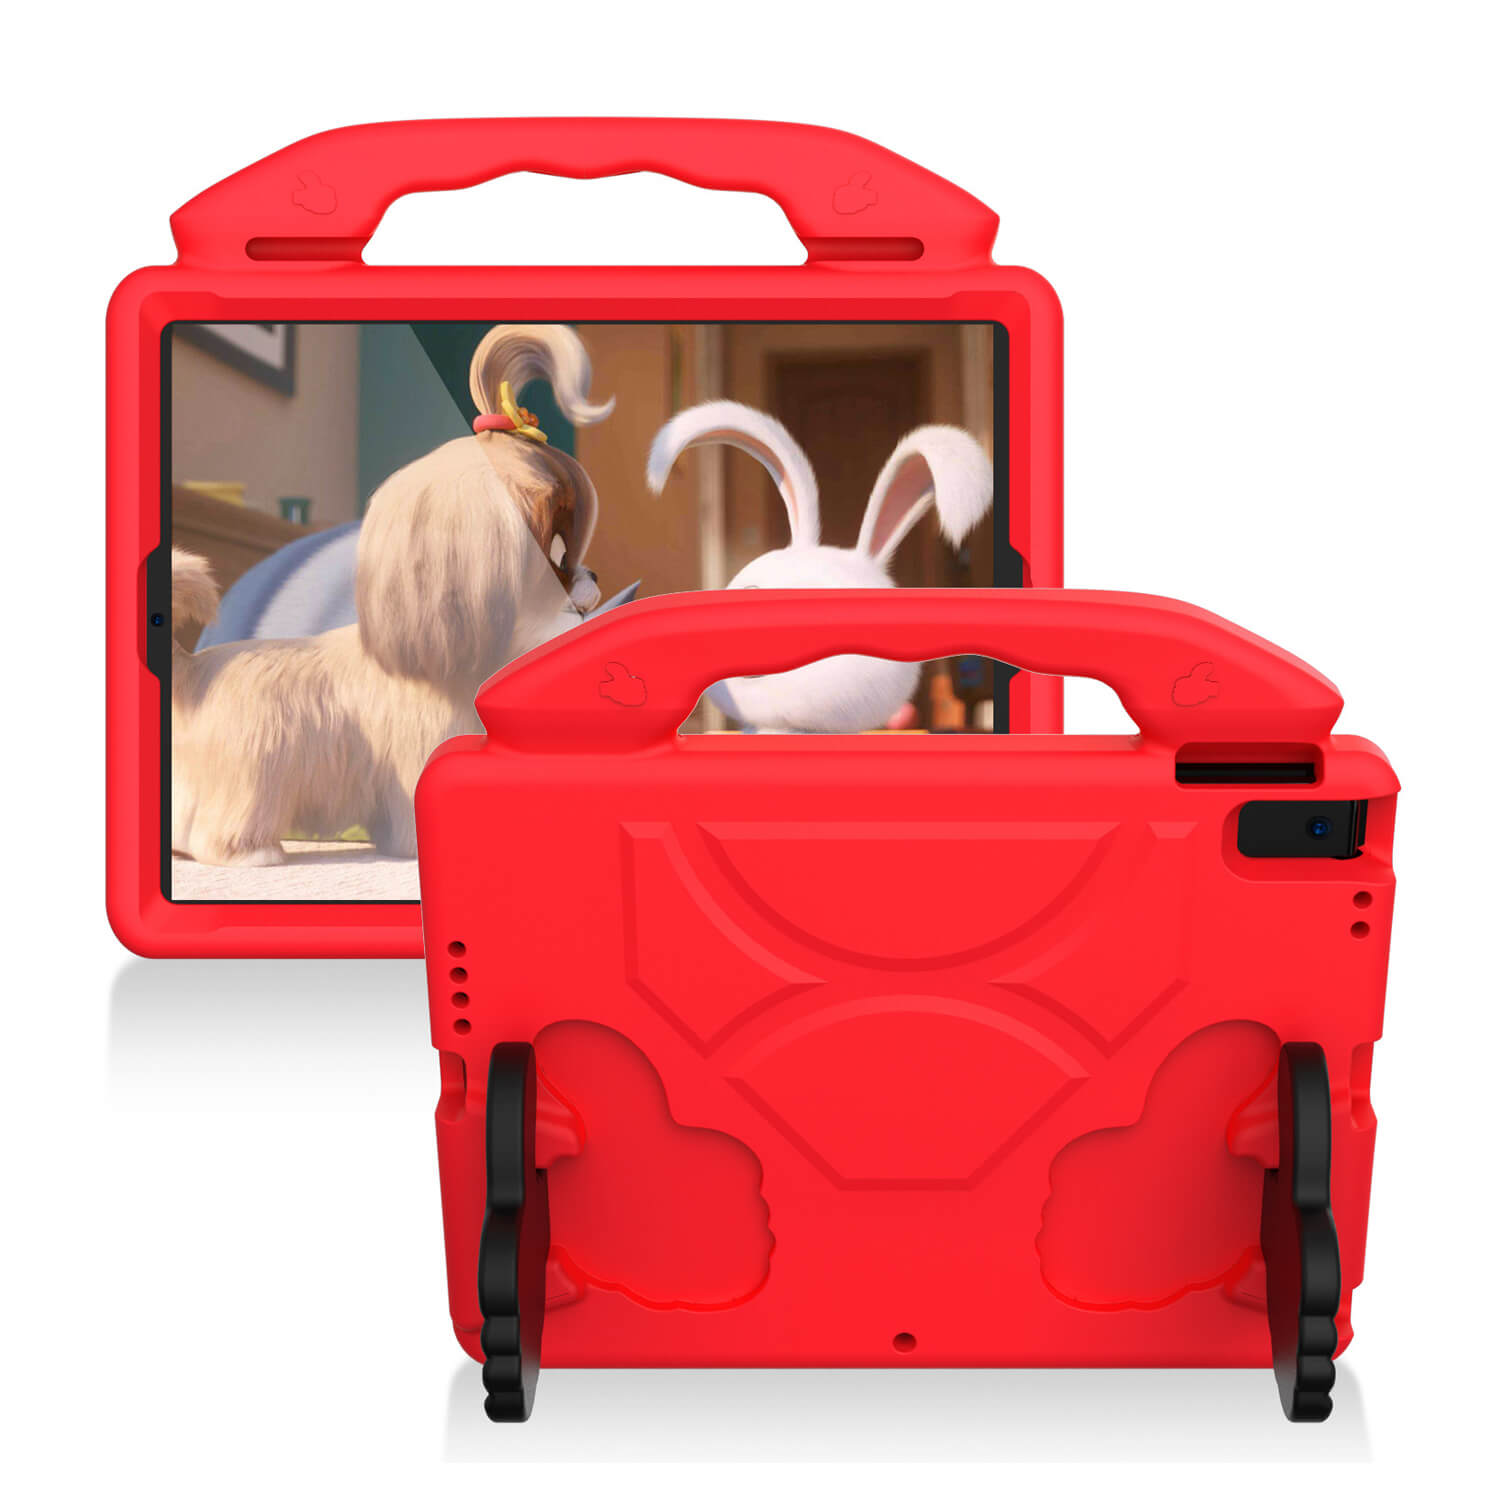 Tough On iPad 7 / 8 / 9th Gen 10.2" Case EVA Kids Protection Red